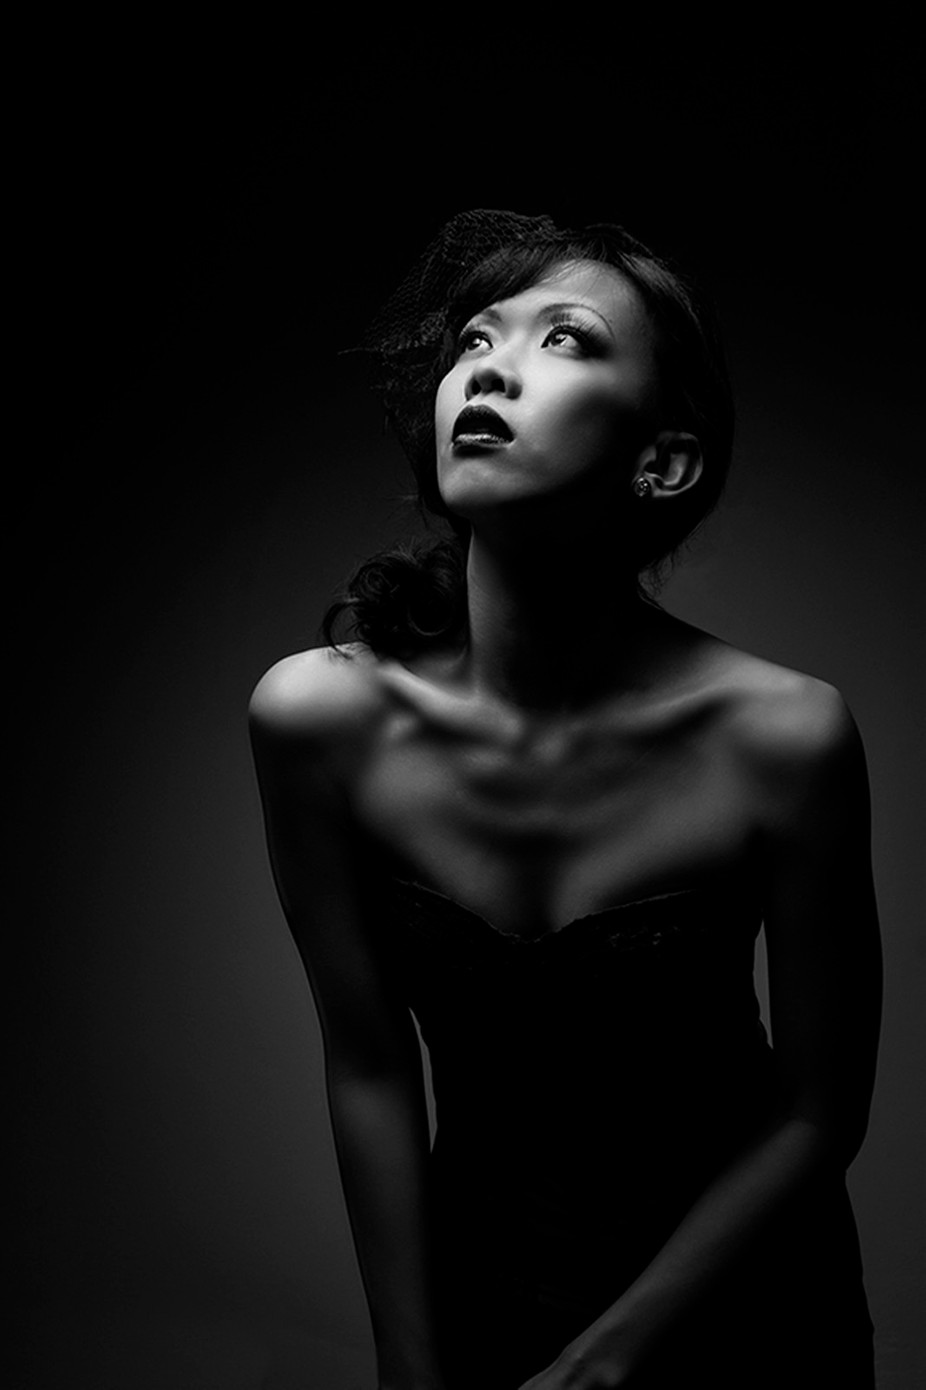 Lily by kajacurtis - Black and White Portraits Photo Contest